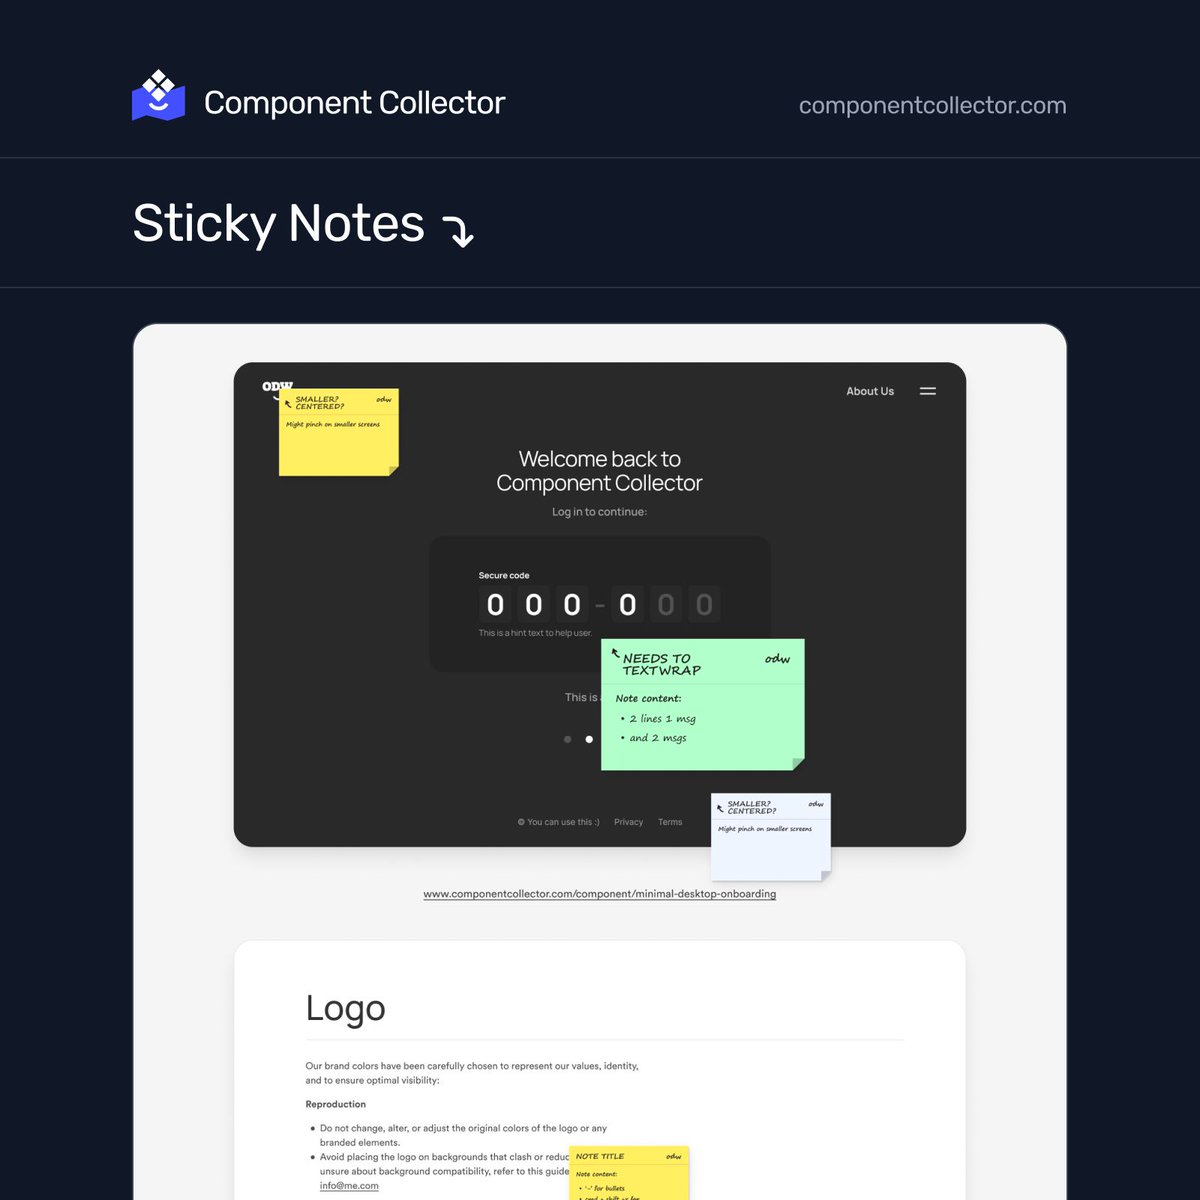 New Figma component! 📇 Find it on Component Collector.
#figma #ui #uiux #component #designsystem #uidesign #componentcollector #buildinpublic #odw